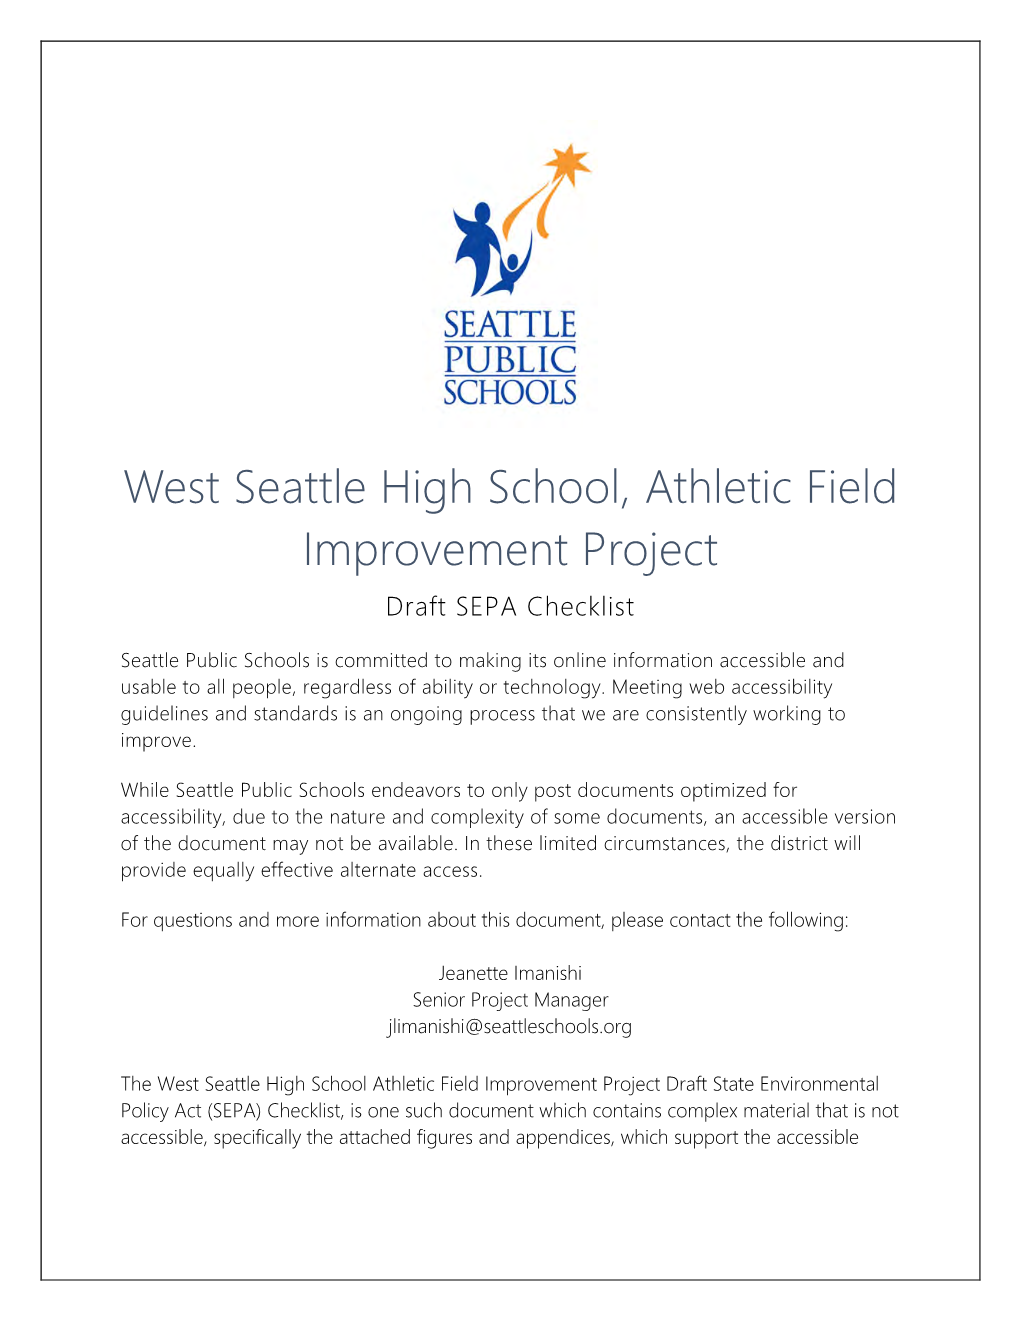 West Seattle High School Athletic Field Improvement Project